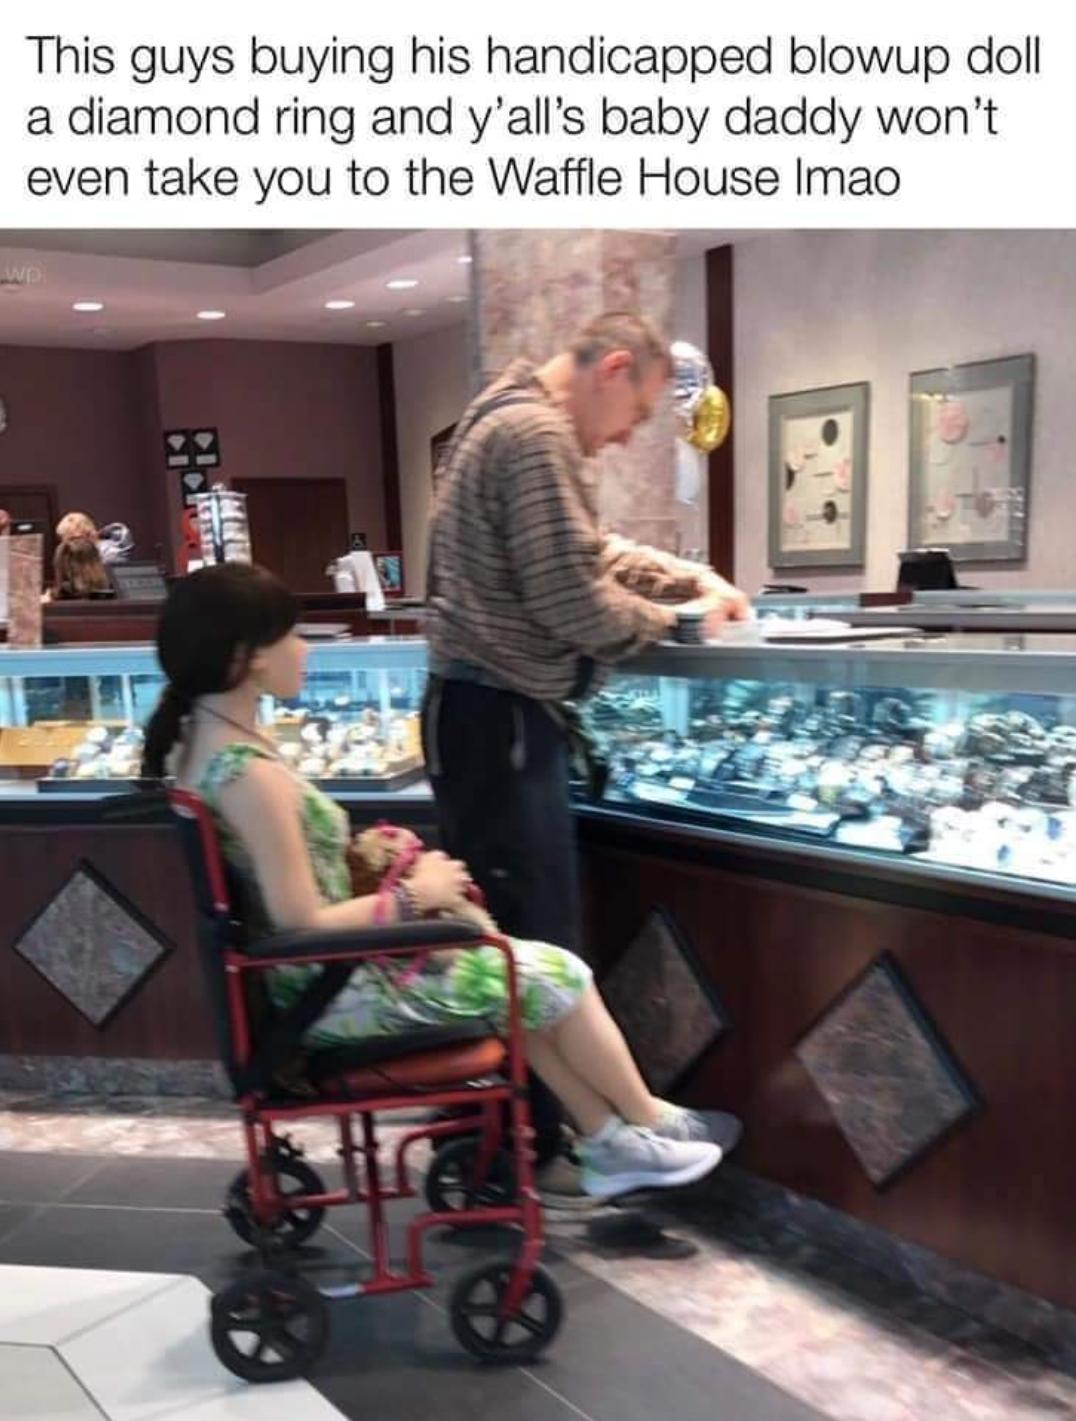 guy buying a sex doll a ring - This guys buying his handicapped blowup doll a diamond ring and y'all's baby daddy won't even take you to the Waffle House Imao w